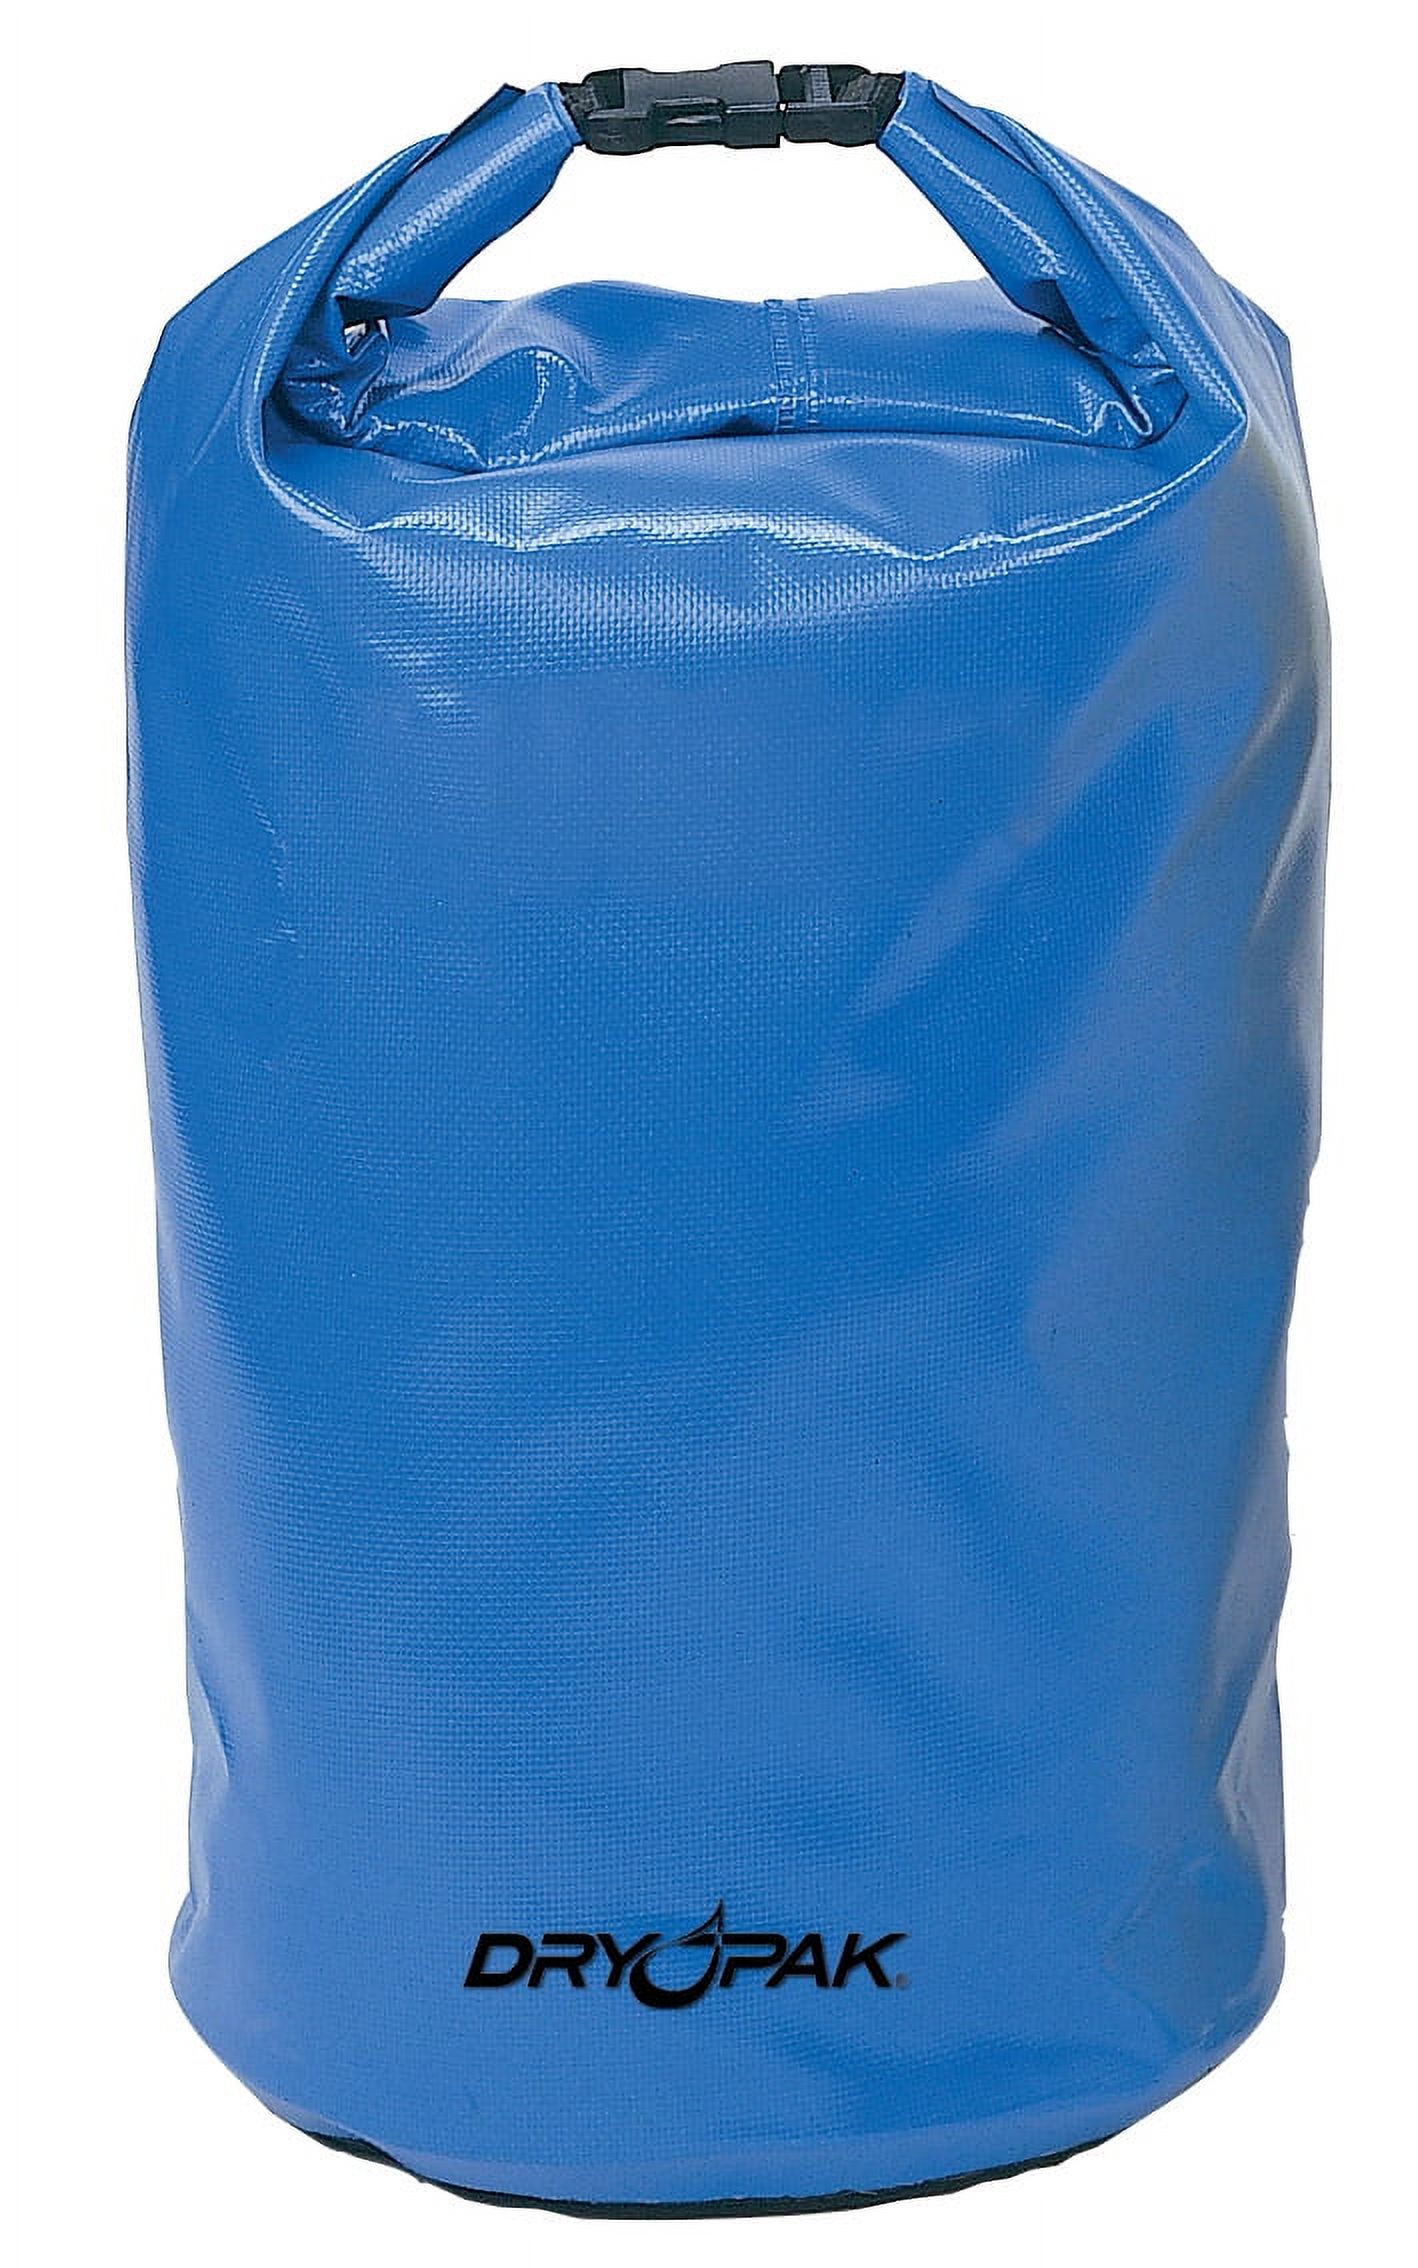 DRY PAK WB-8 Roll Top Dry Gear Bag, Blue, 12.5 X 28 -Inch - image 1 of 3